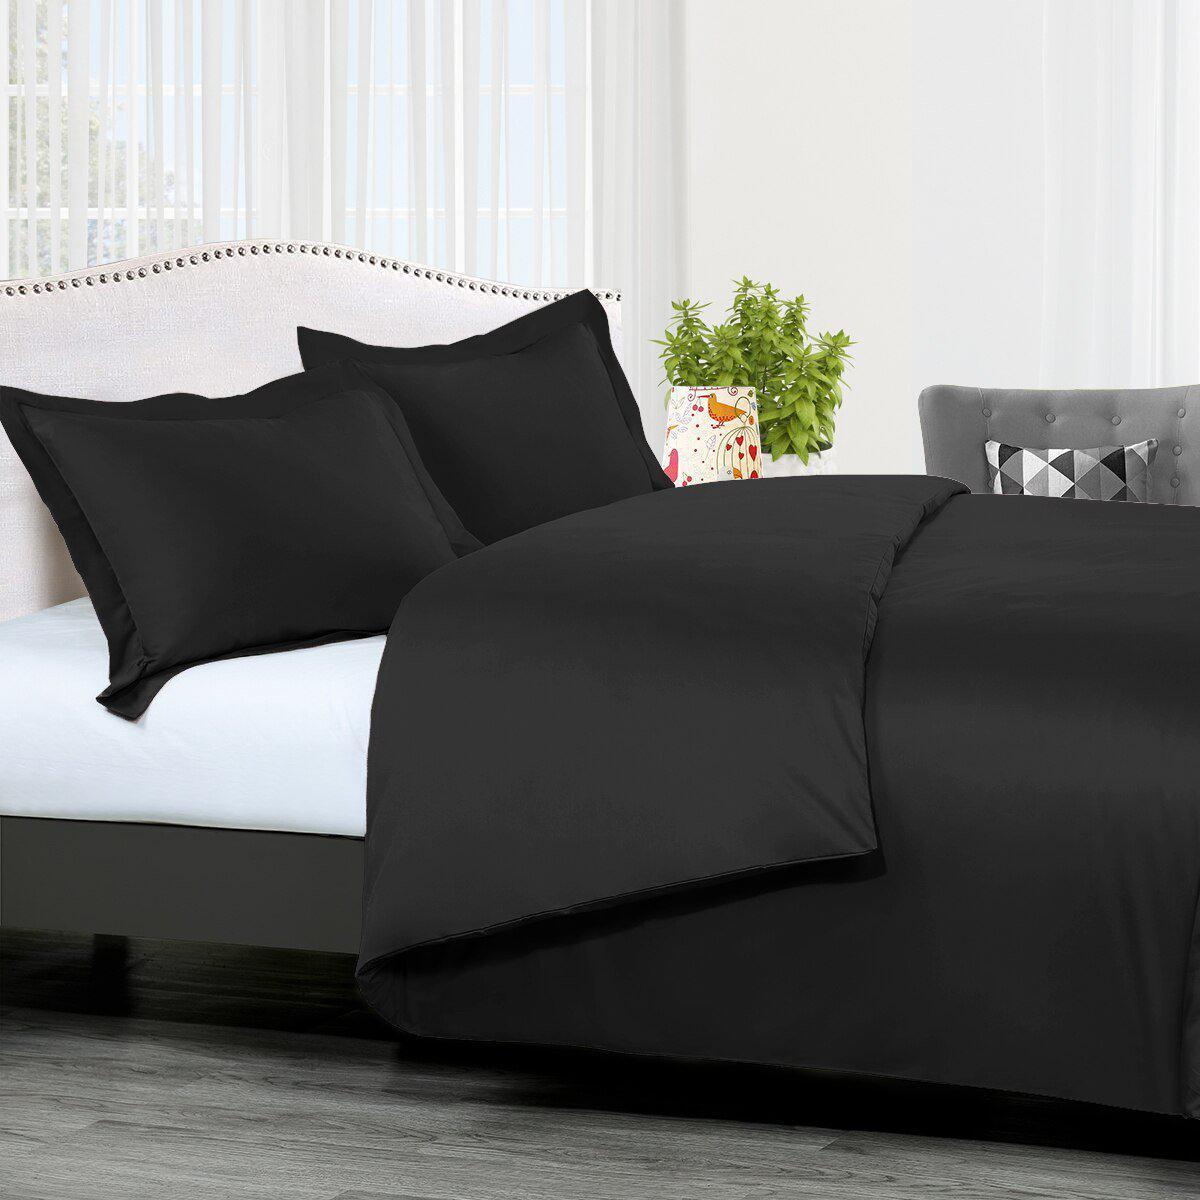 Royal Tradition Solid 600 Thread Count, 100-Percent Cotton Bed Sheets Inclu  シーツ、カバー